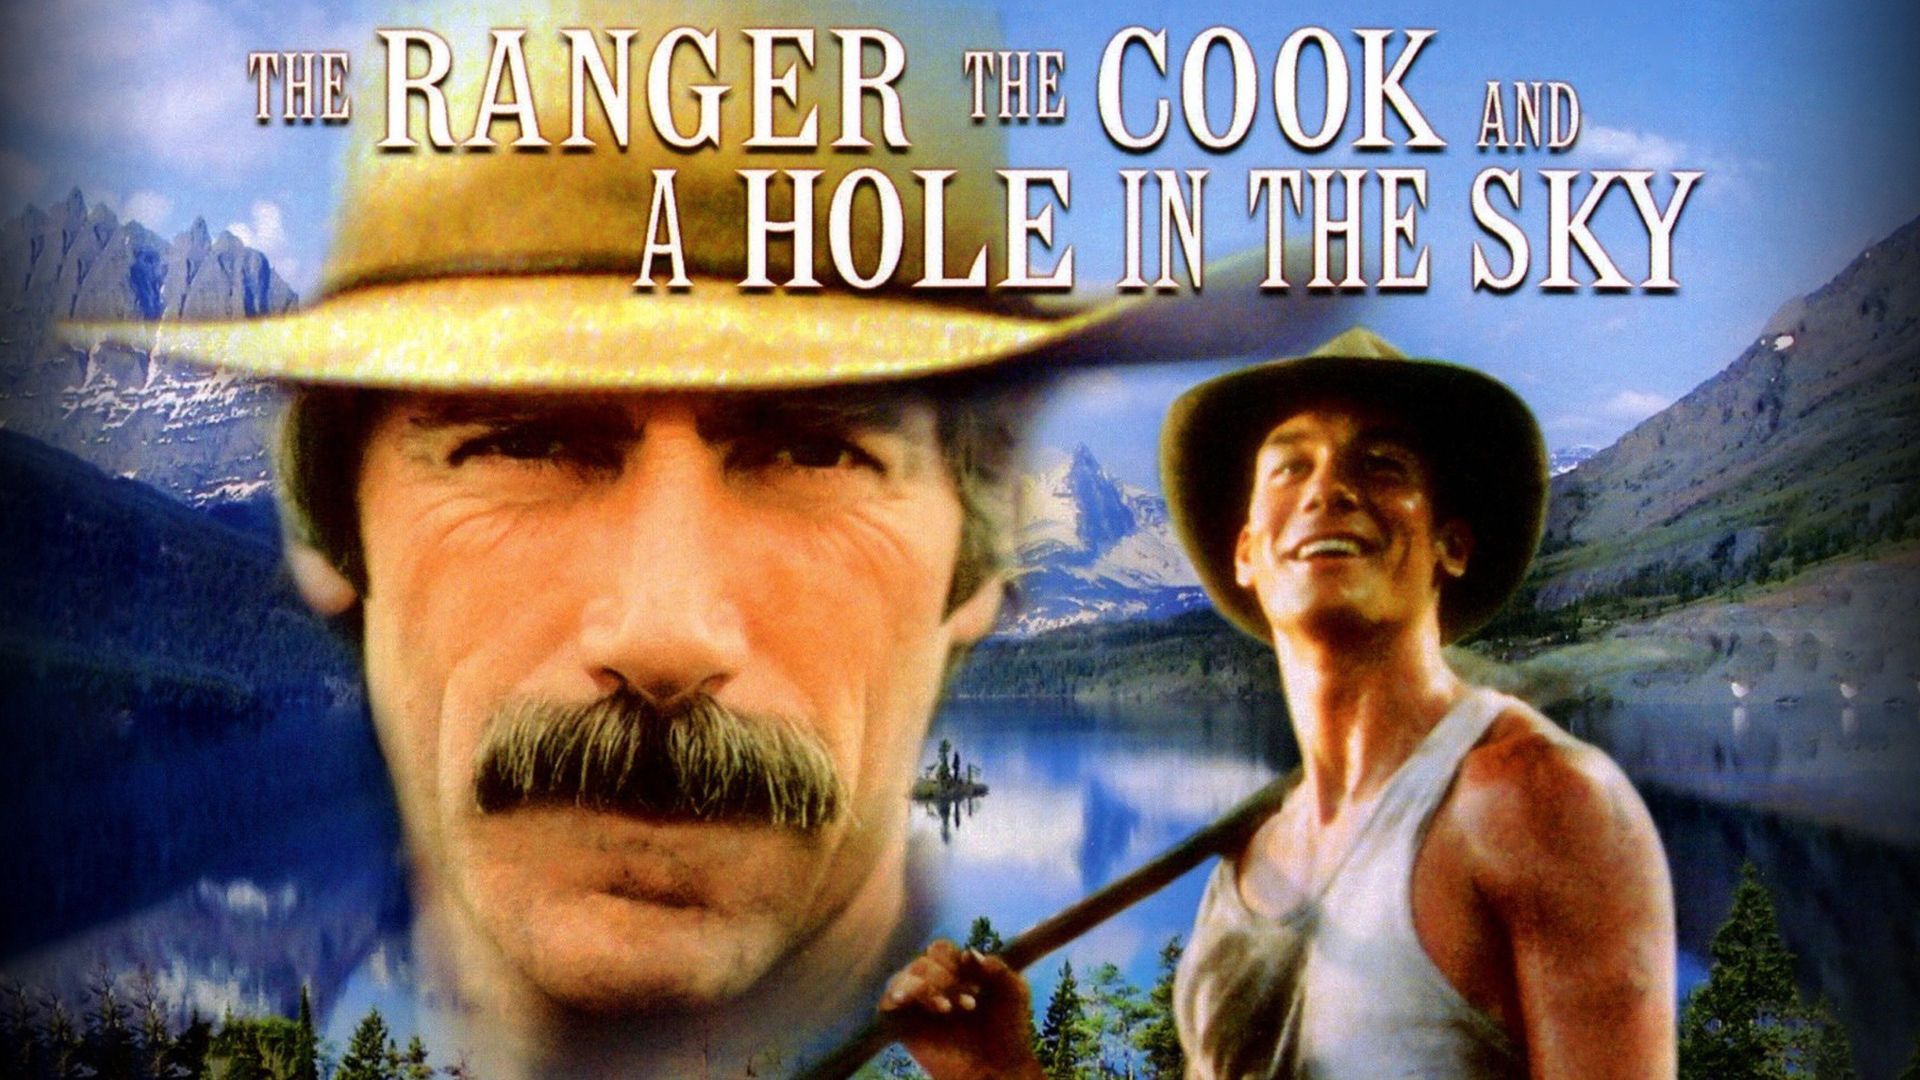 The Ranger, the Cook and a Hole in the Sky Backdrop